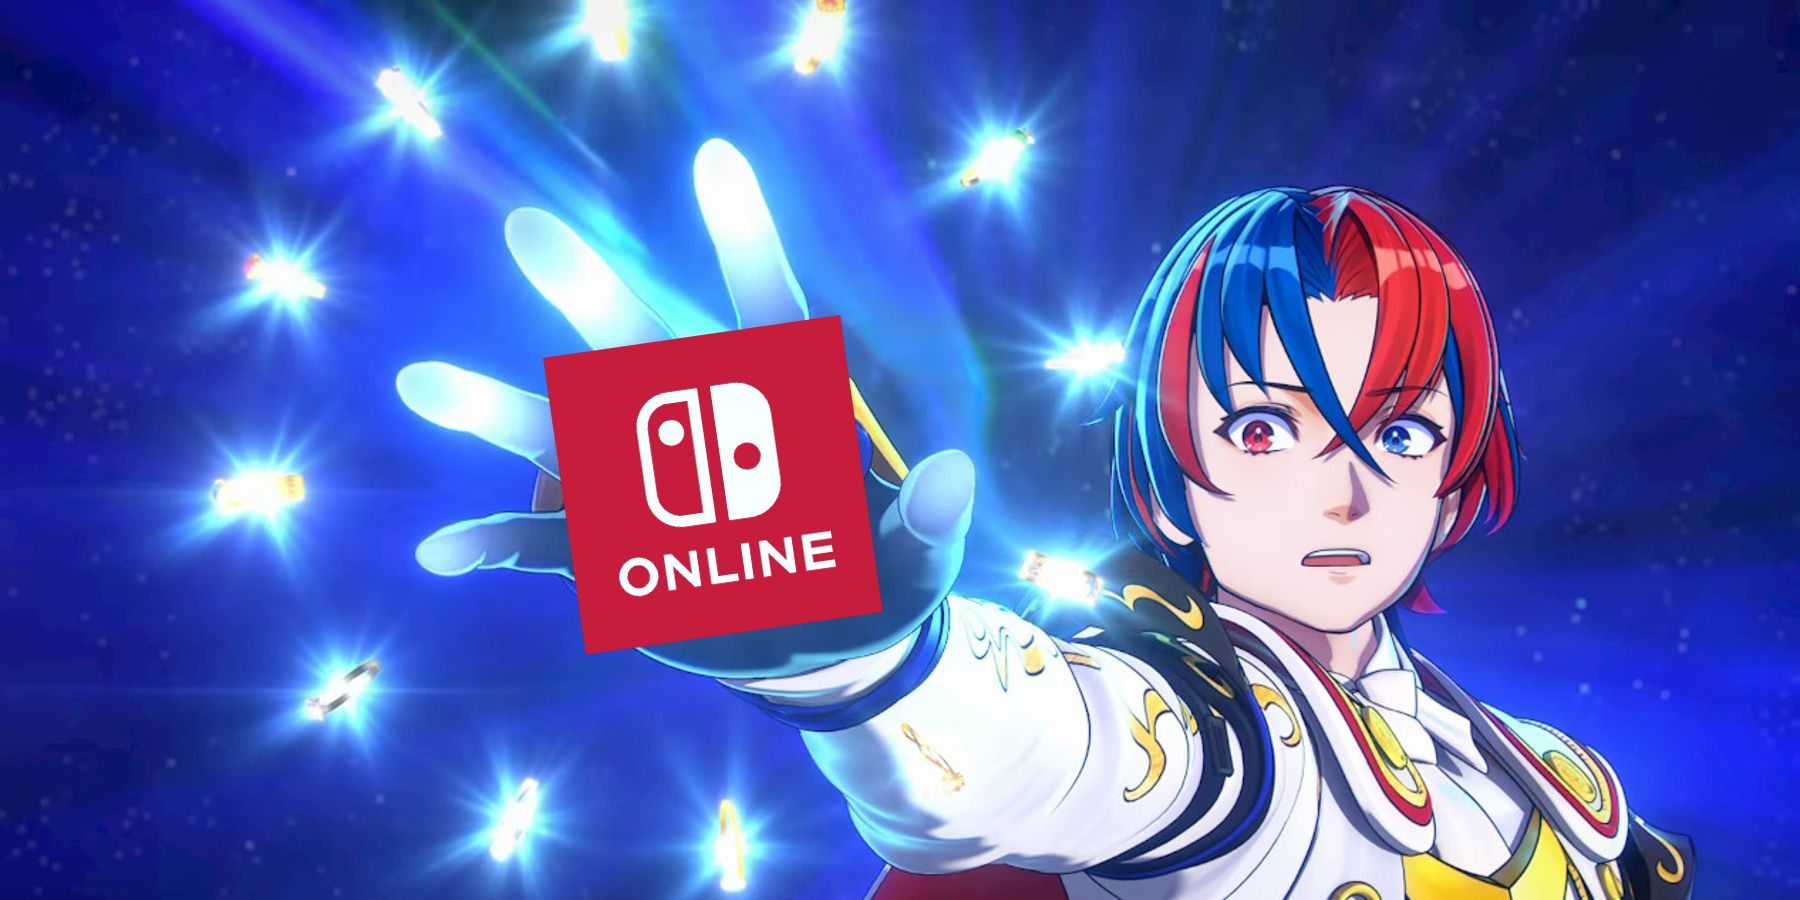 Fire Emblem GBA Games Added to Nintendo Switch Online